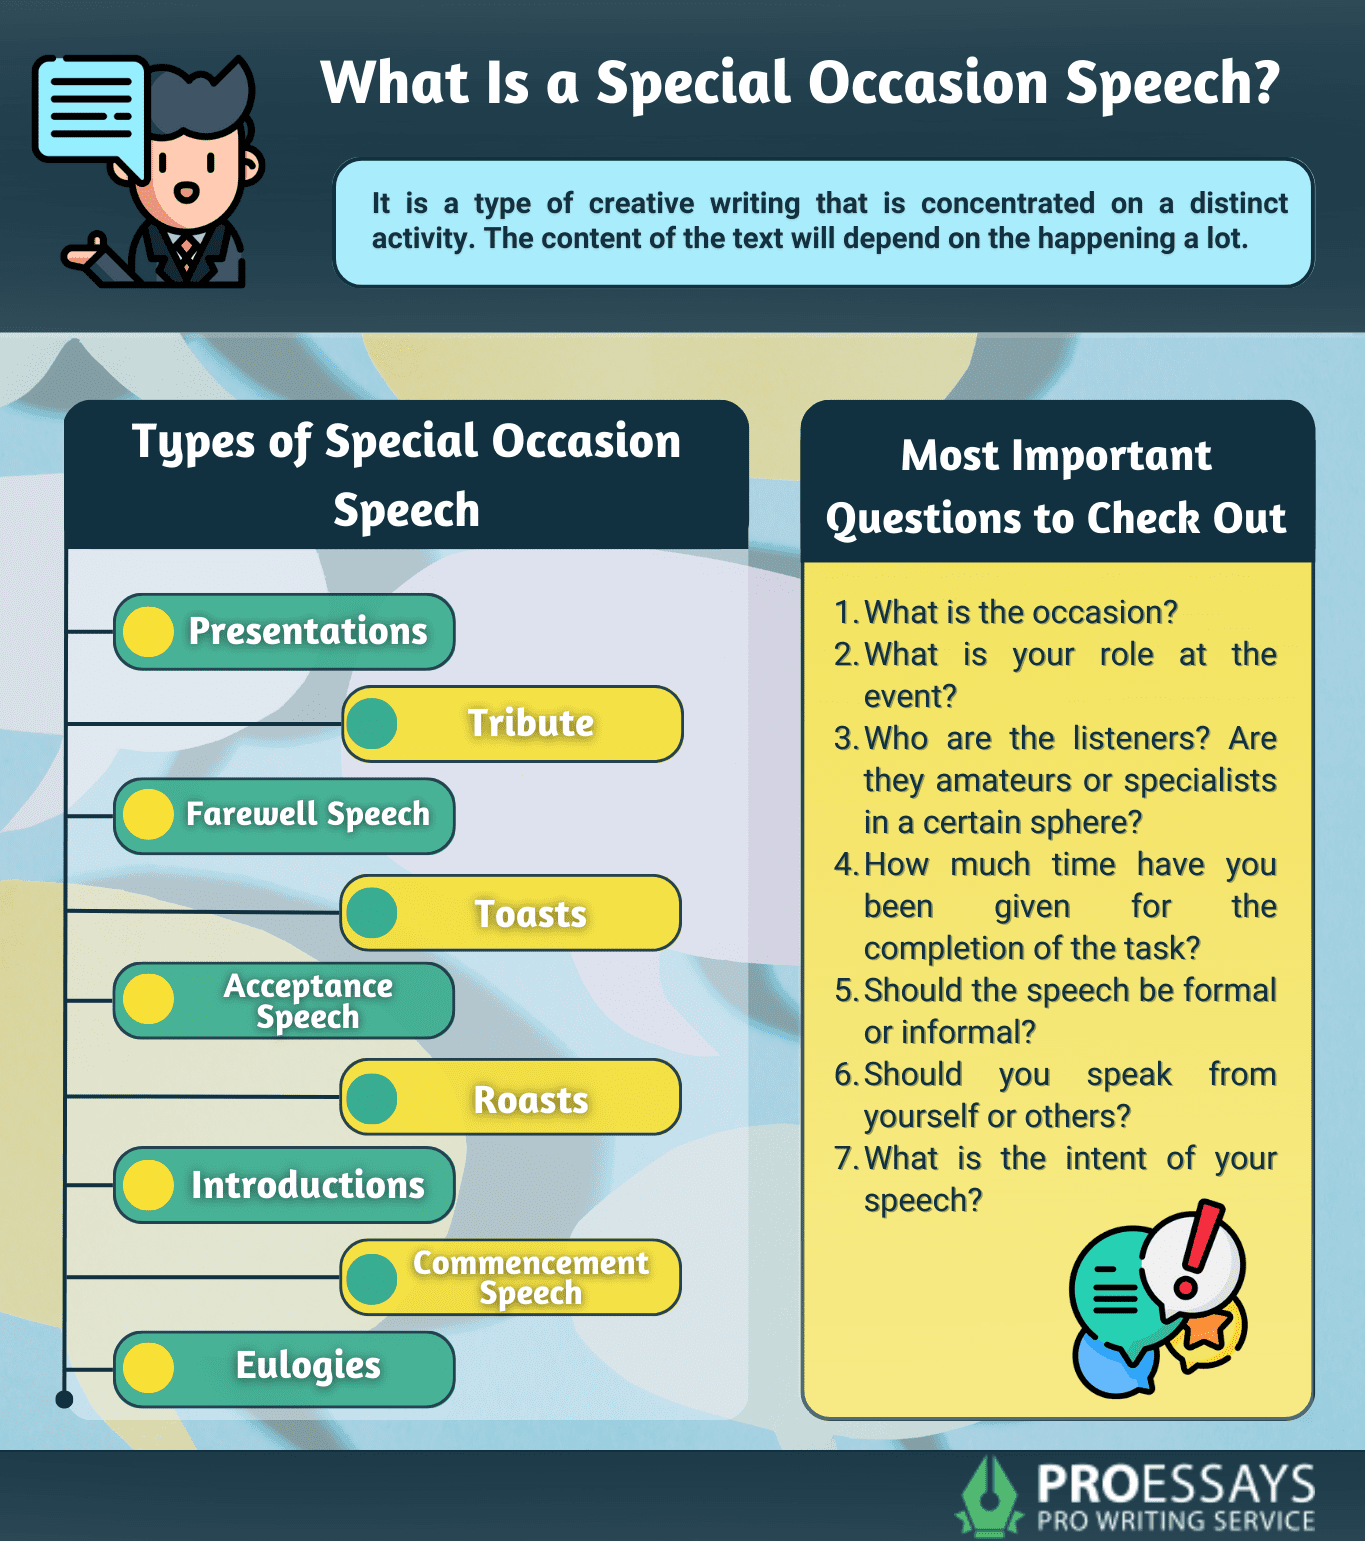 Special Occasion Speech: Types and Tips